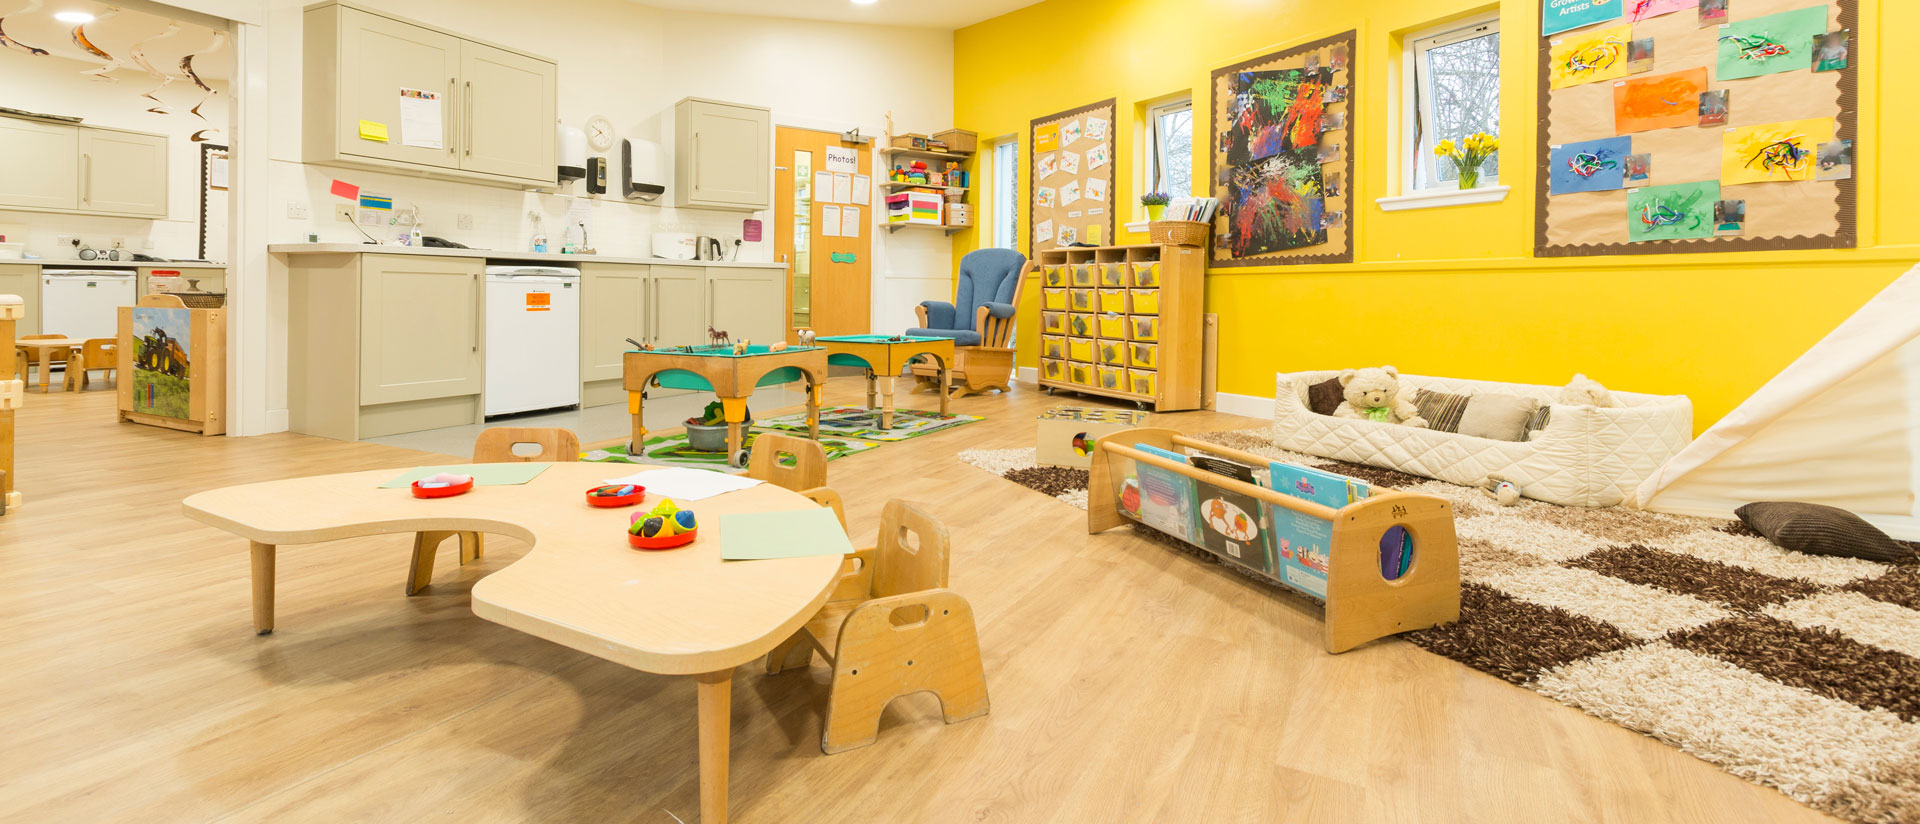 Cramond Early Learning and Childcare